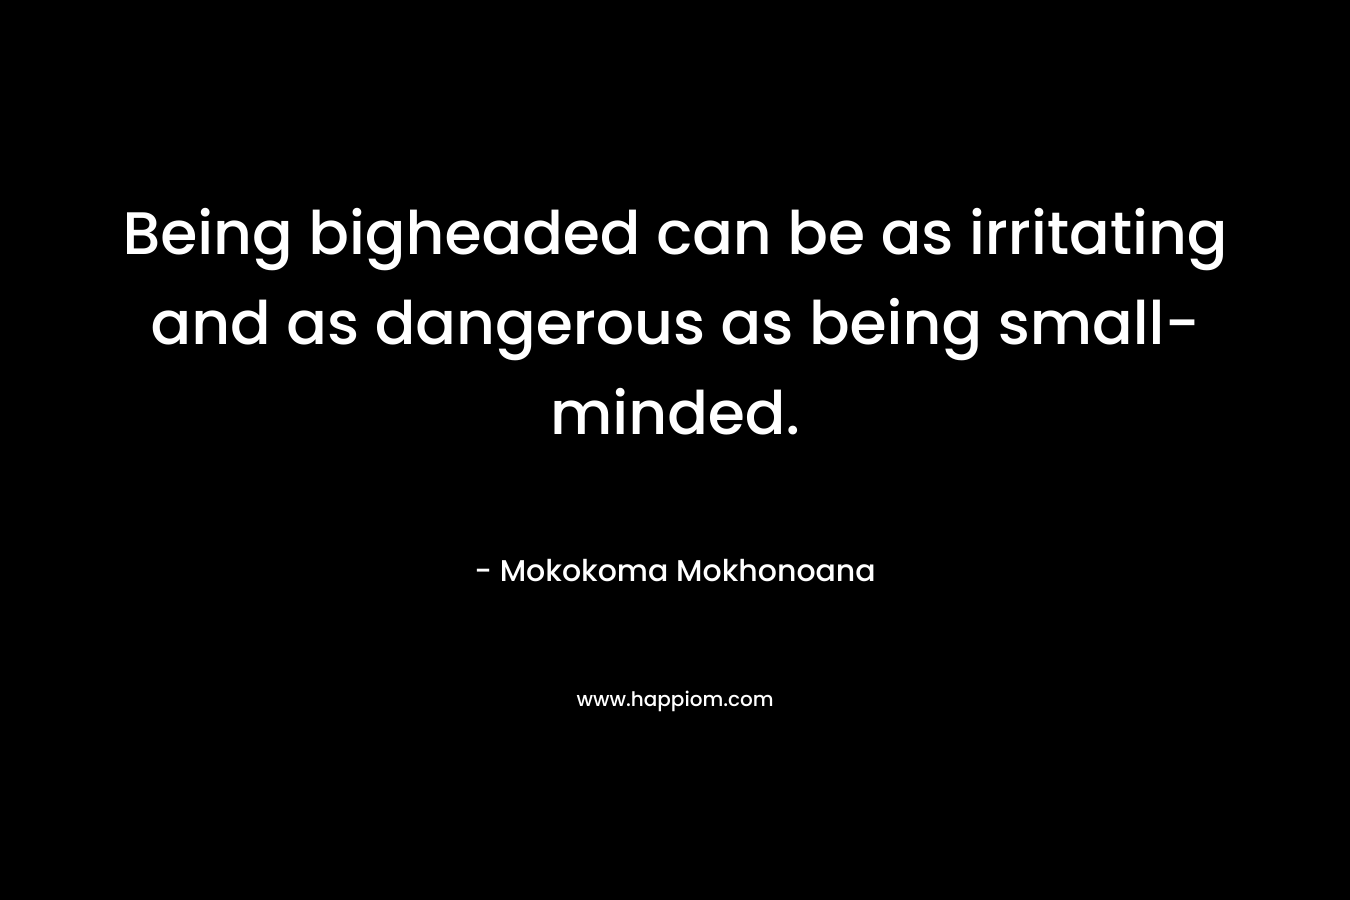 Being bigheaded can be as irritating and as dangerous as being small-minded. – Mokokoma Mokhonoana